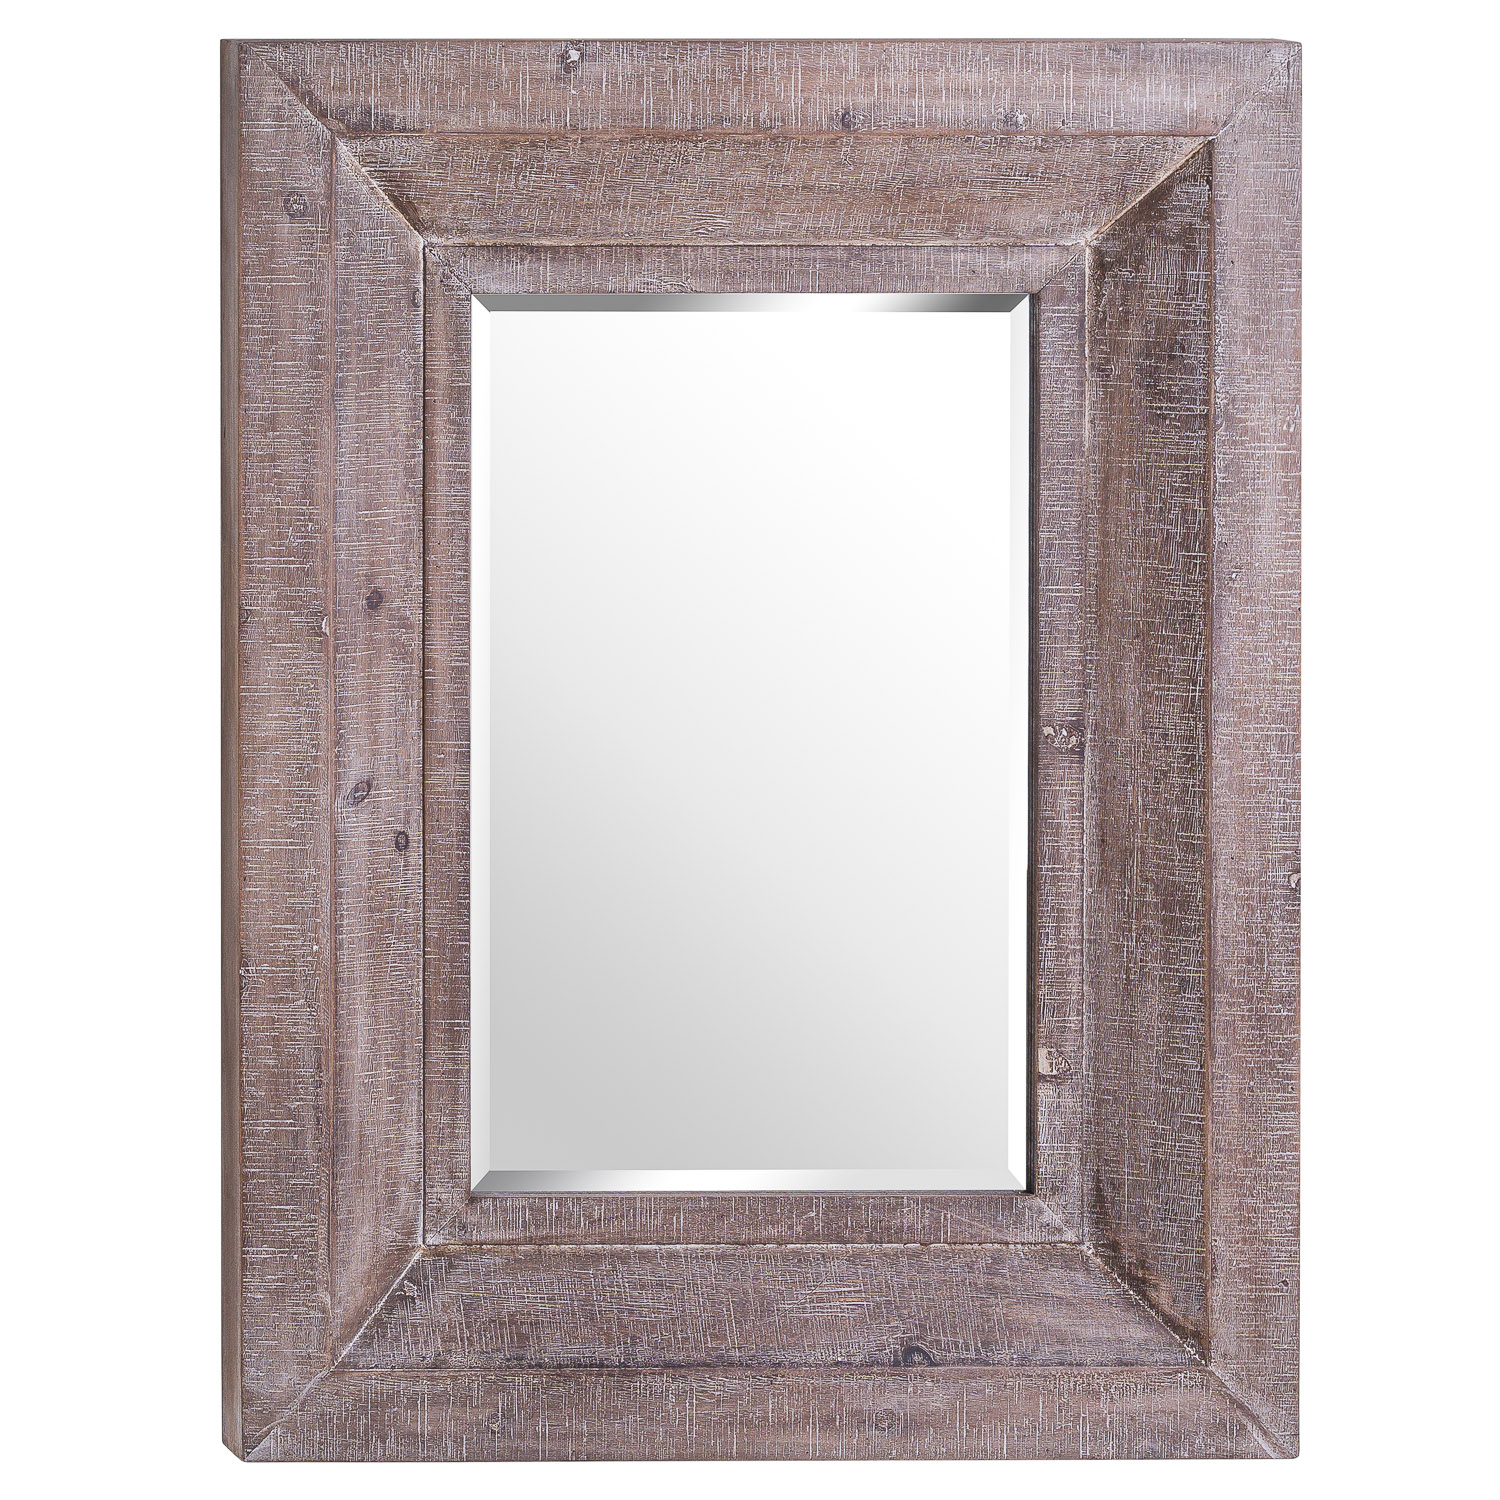 The Wharfedale Reclaimed Wooden Wall Mirror